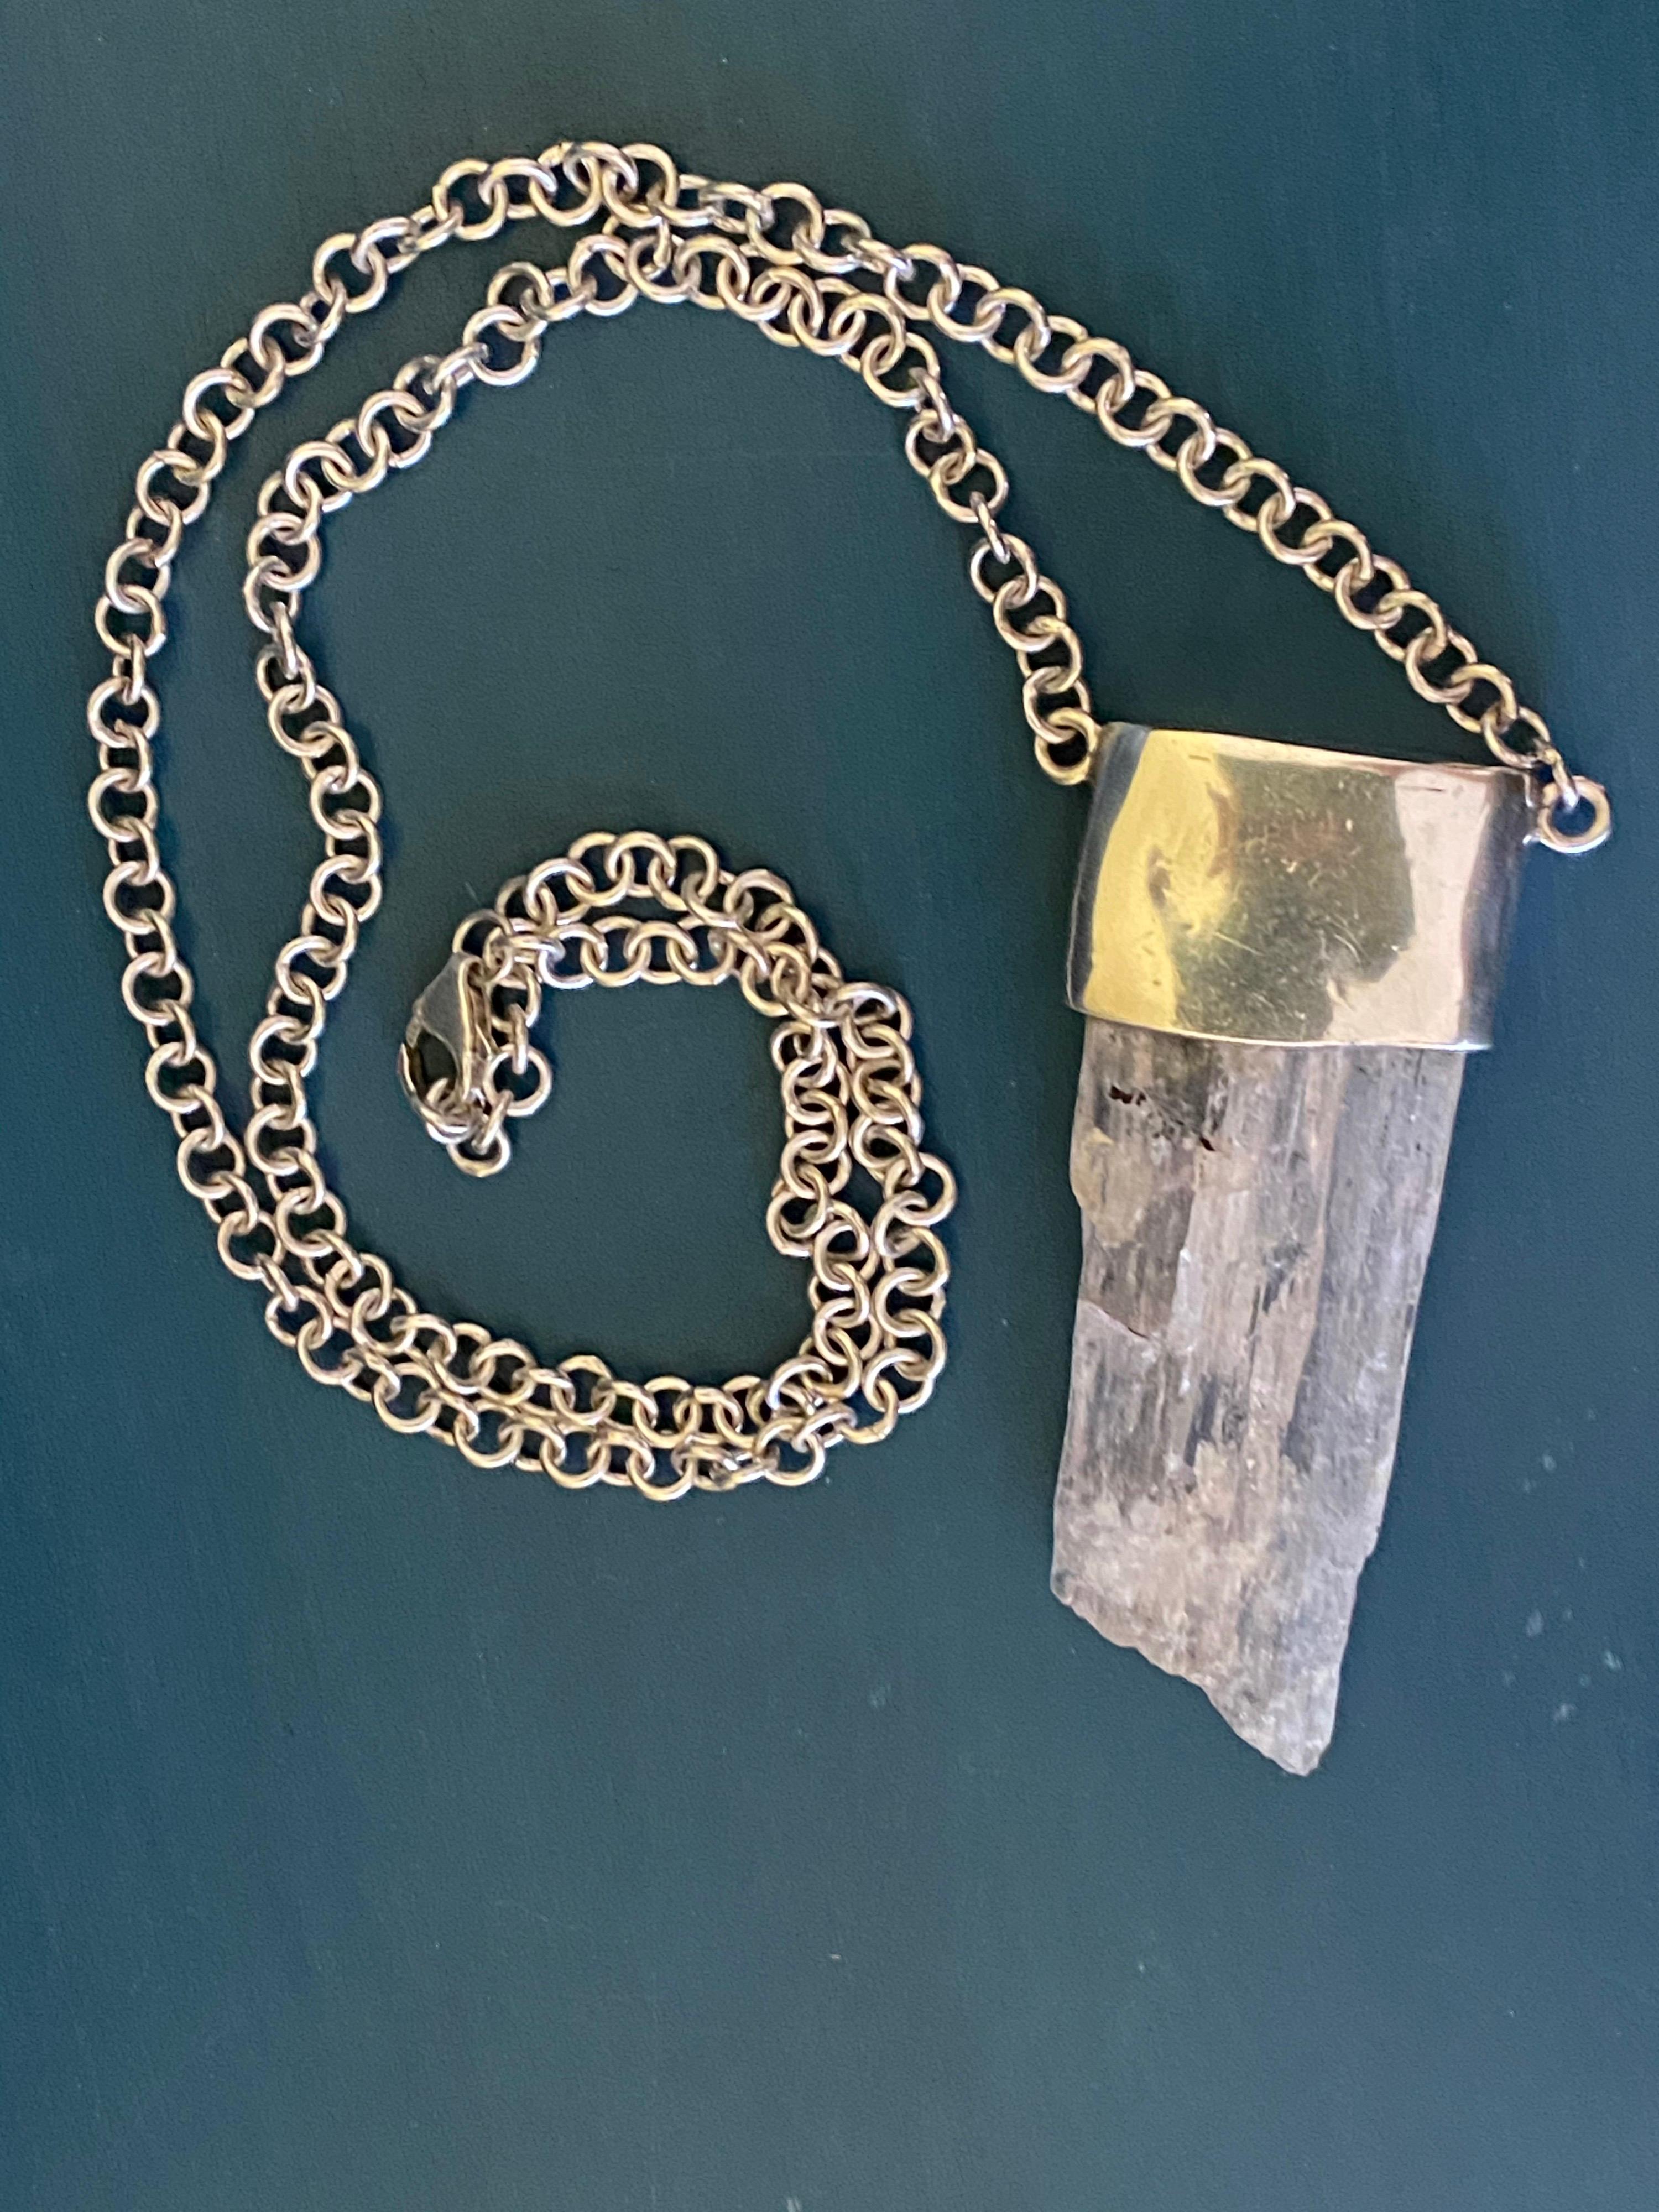 Chunky Uncut large Kunzite Crystal set in a top bezel of Sterling Silver and a Rolo style chain with a generous Lobster Claw Clasp. Bohemian Chic Fashion styled necklace that will match any outfit. Measures 14 inches in length. 